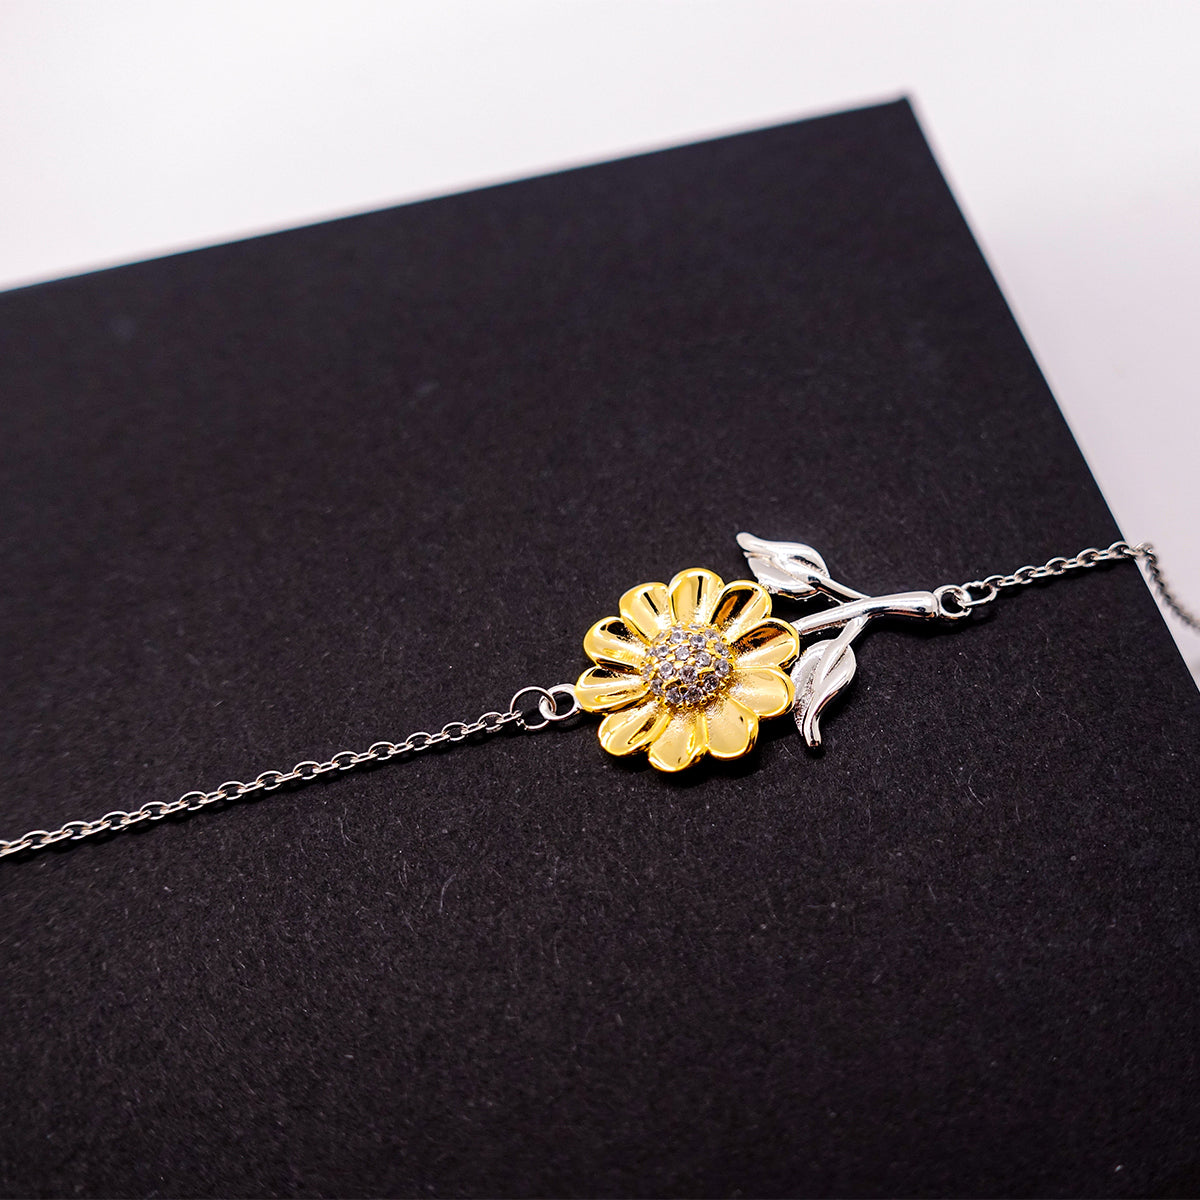 Unbiological Dad Sunflower Bracelet - Special Place in My Heart, Inspirational Gift for Fathers Day, Christmas, Birthday, Confidence-boosting Jewelry